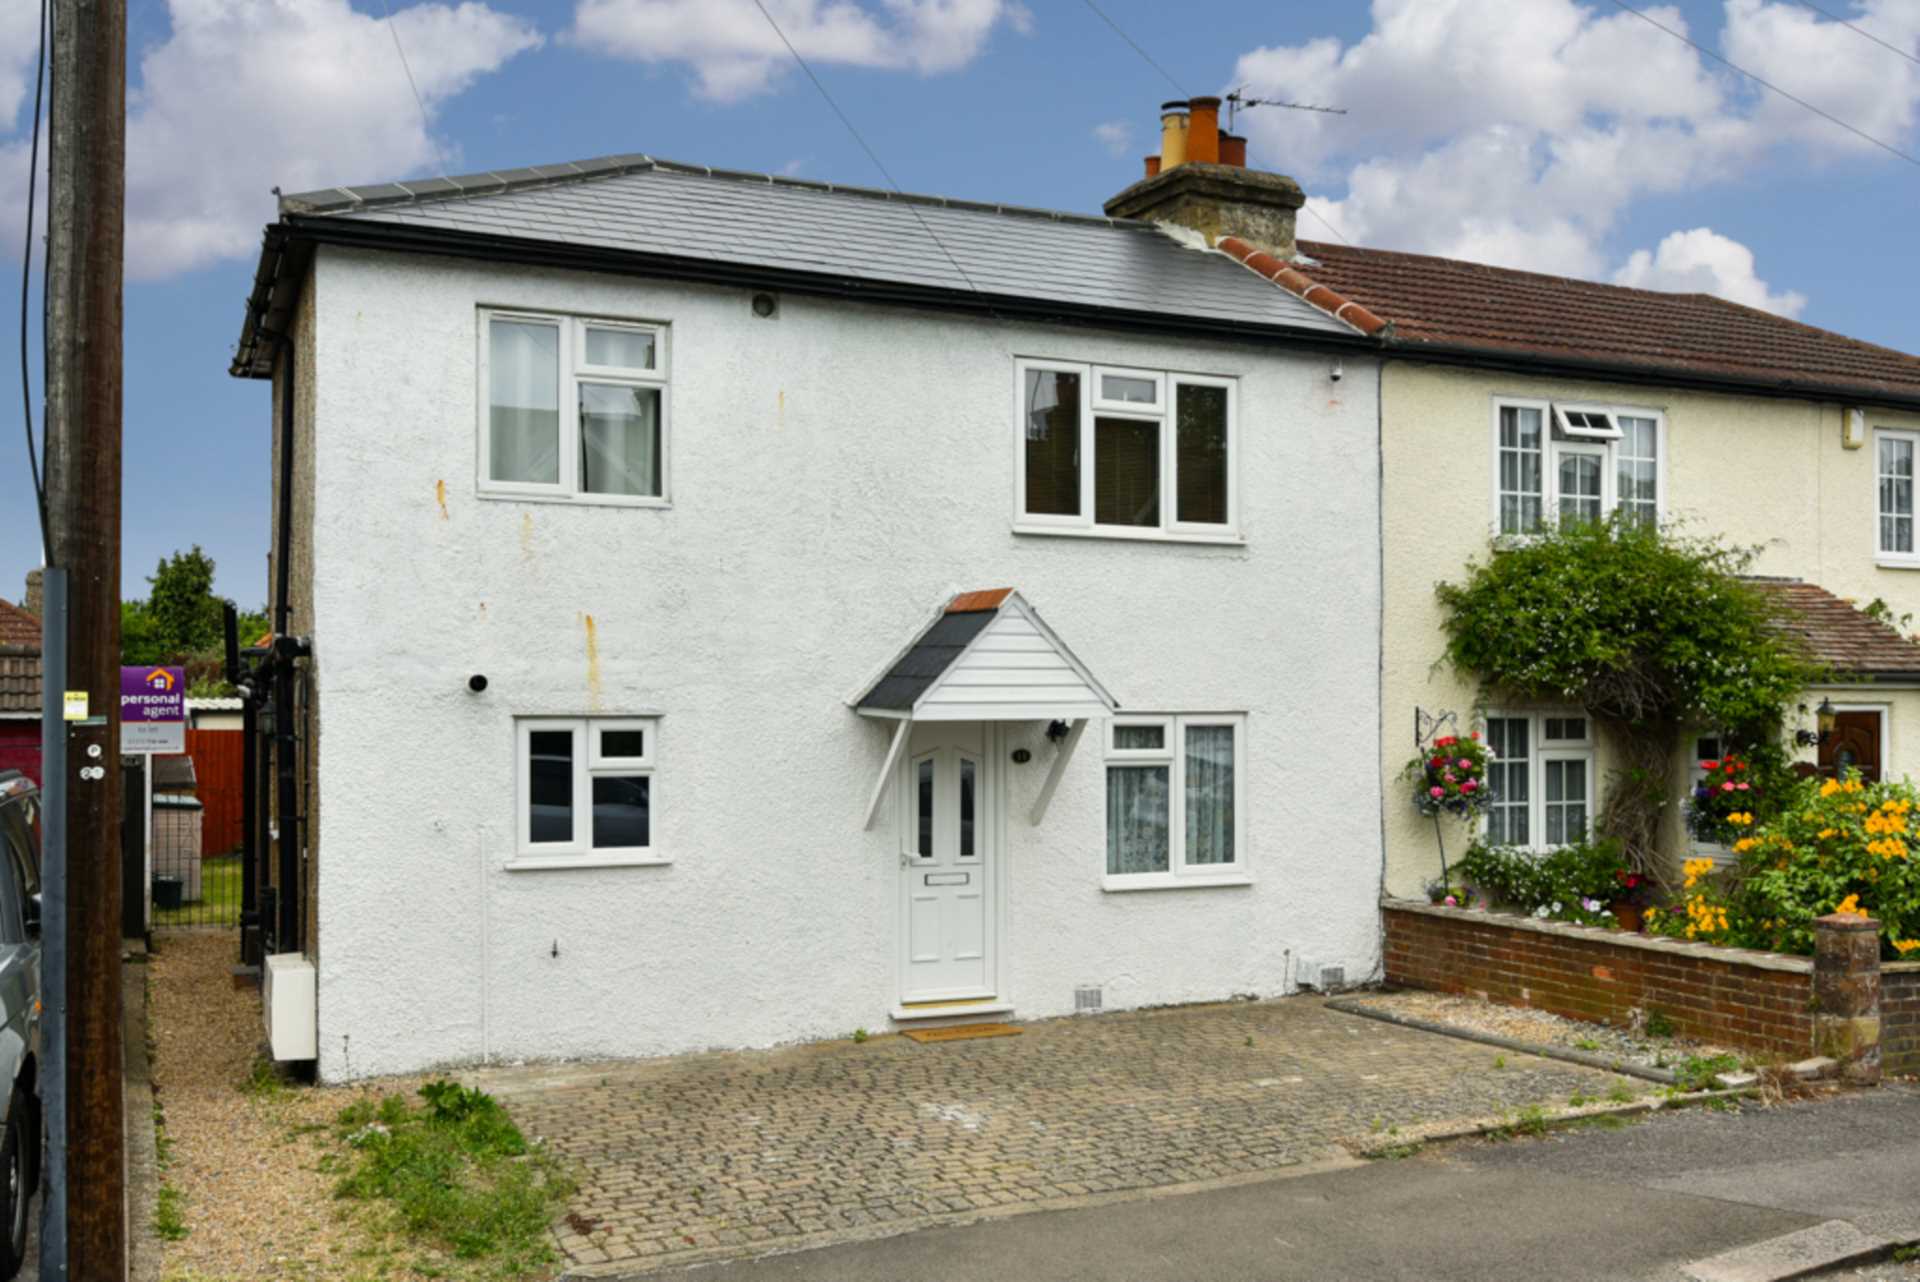 2 bed House (unspecified) for rent in Ewell. From The Personal Agent - Epsom